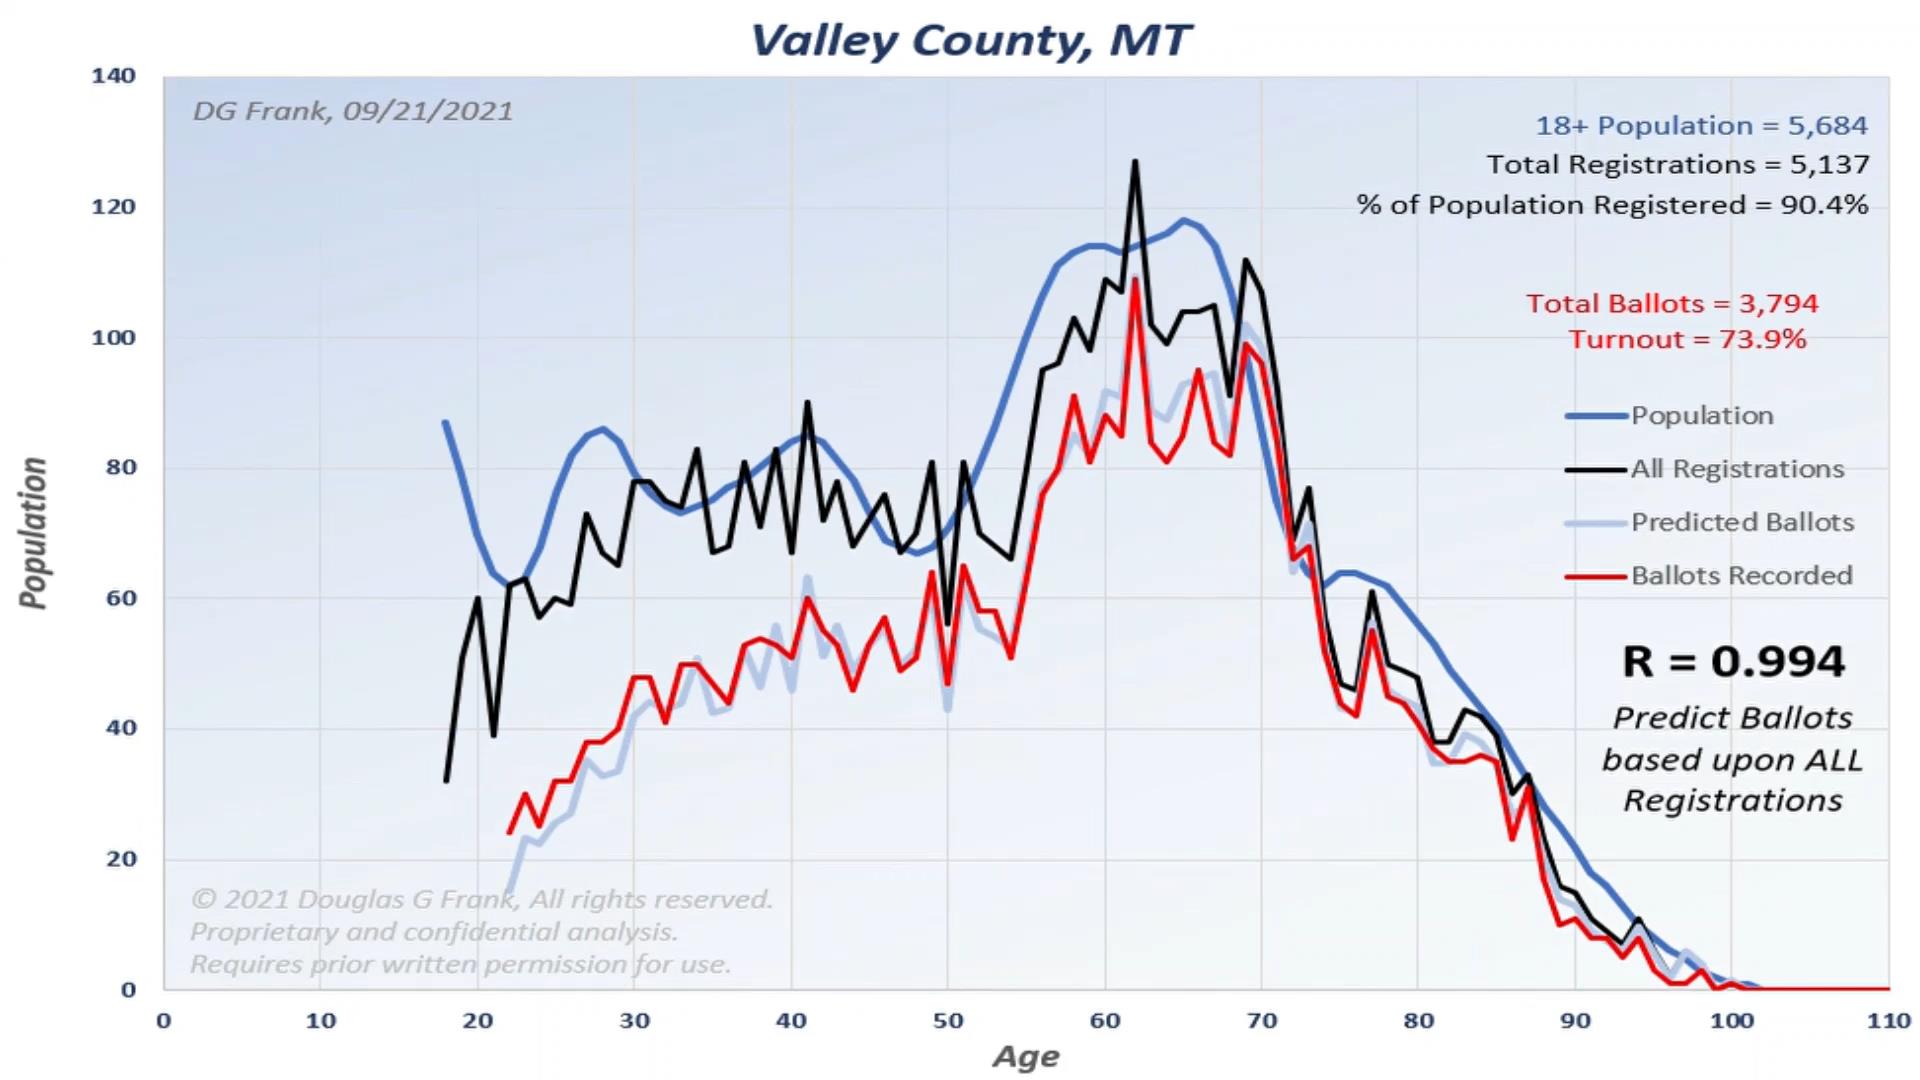 Valley County 2020 Election Analysis Chart by Dr. Doug Frank